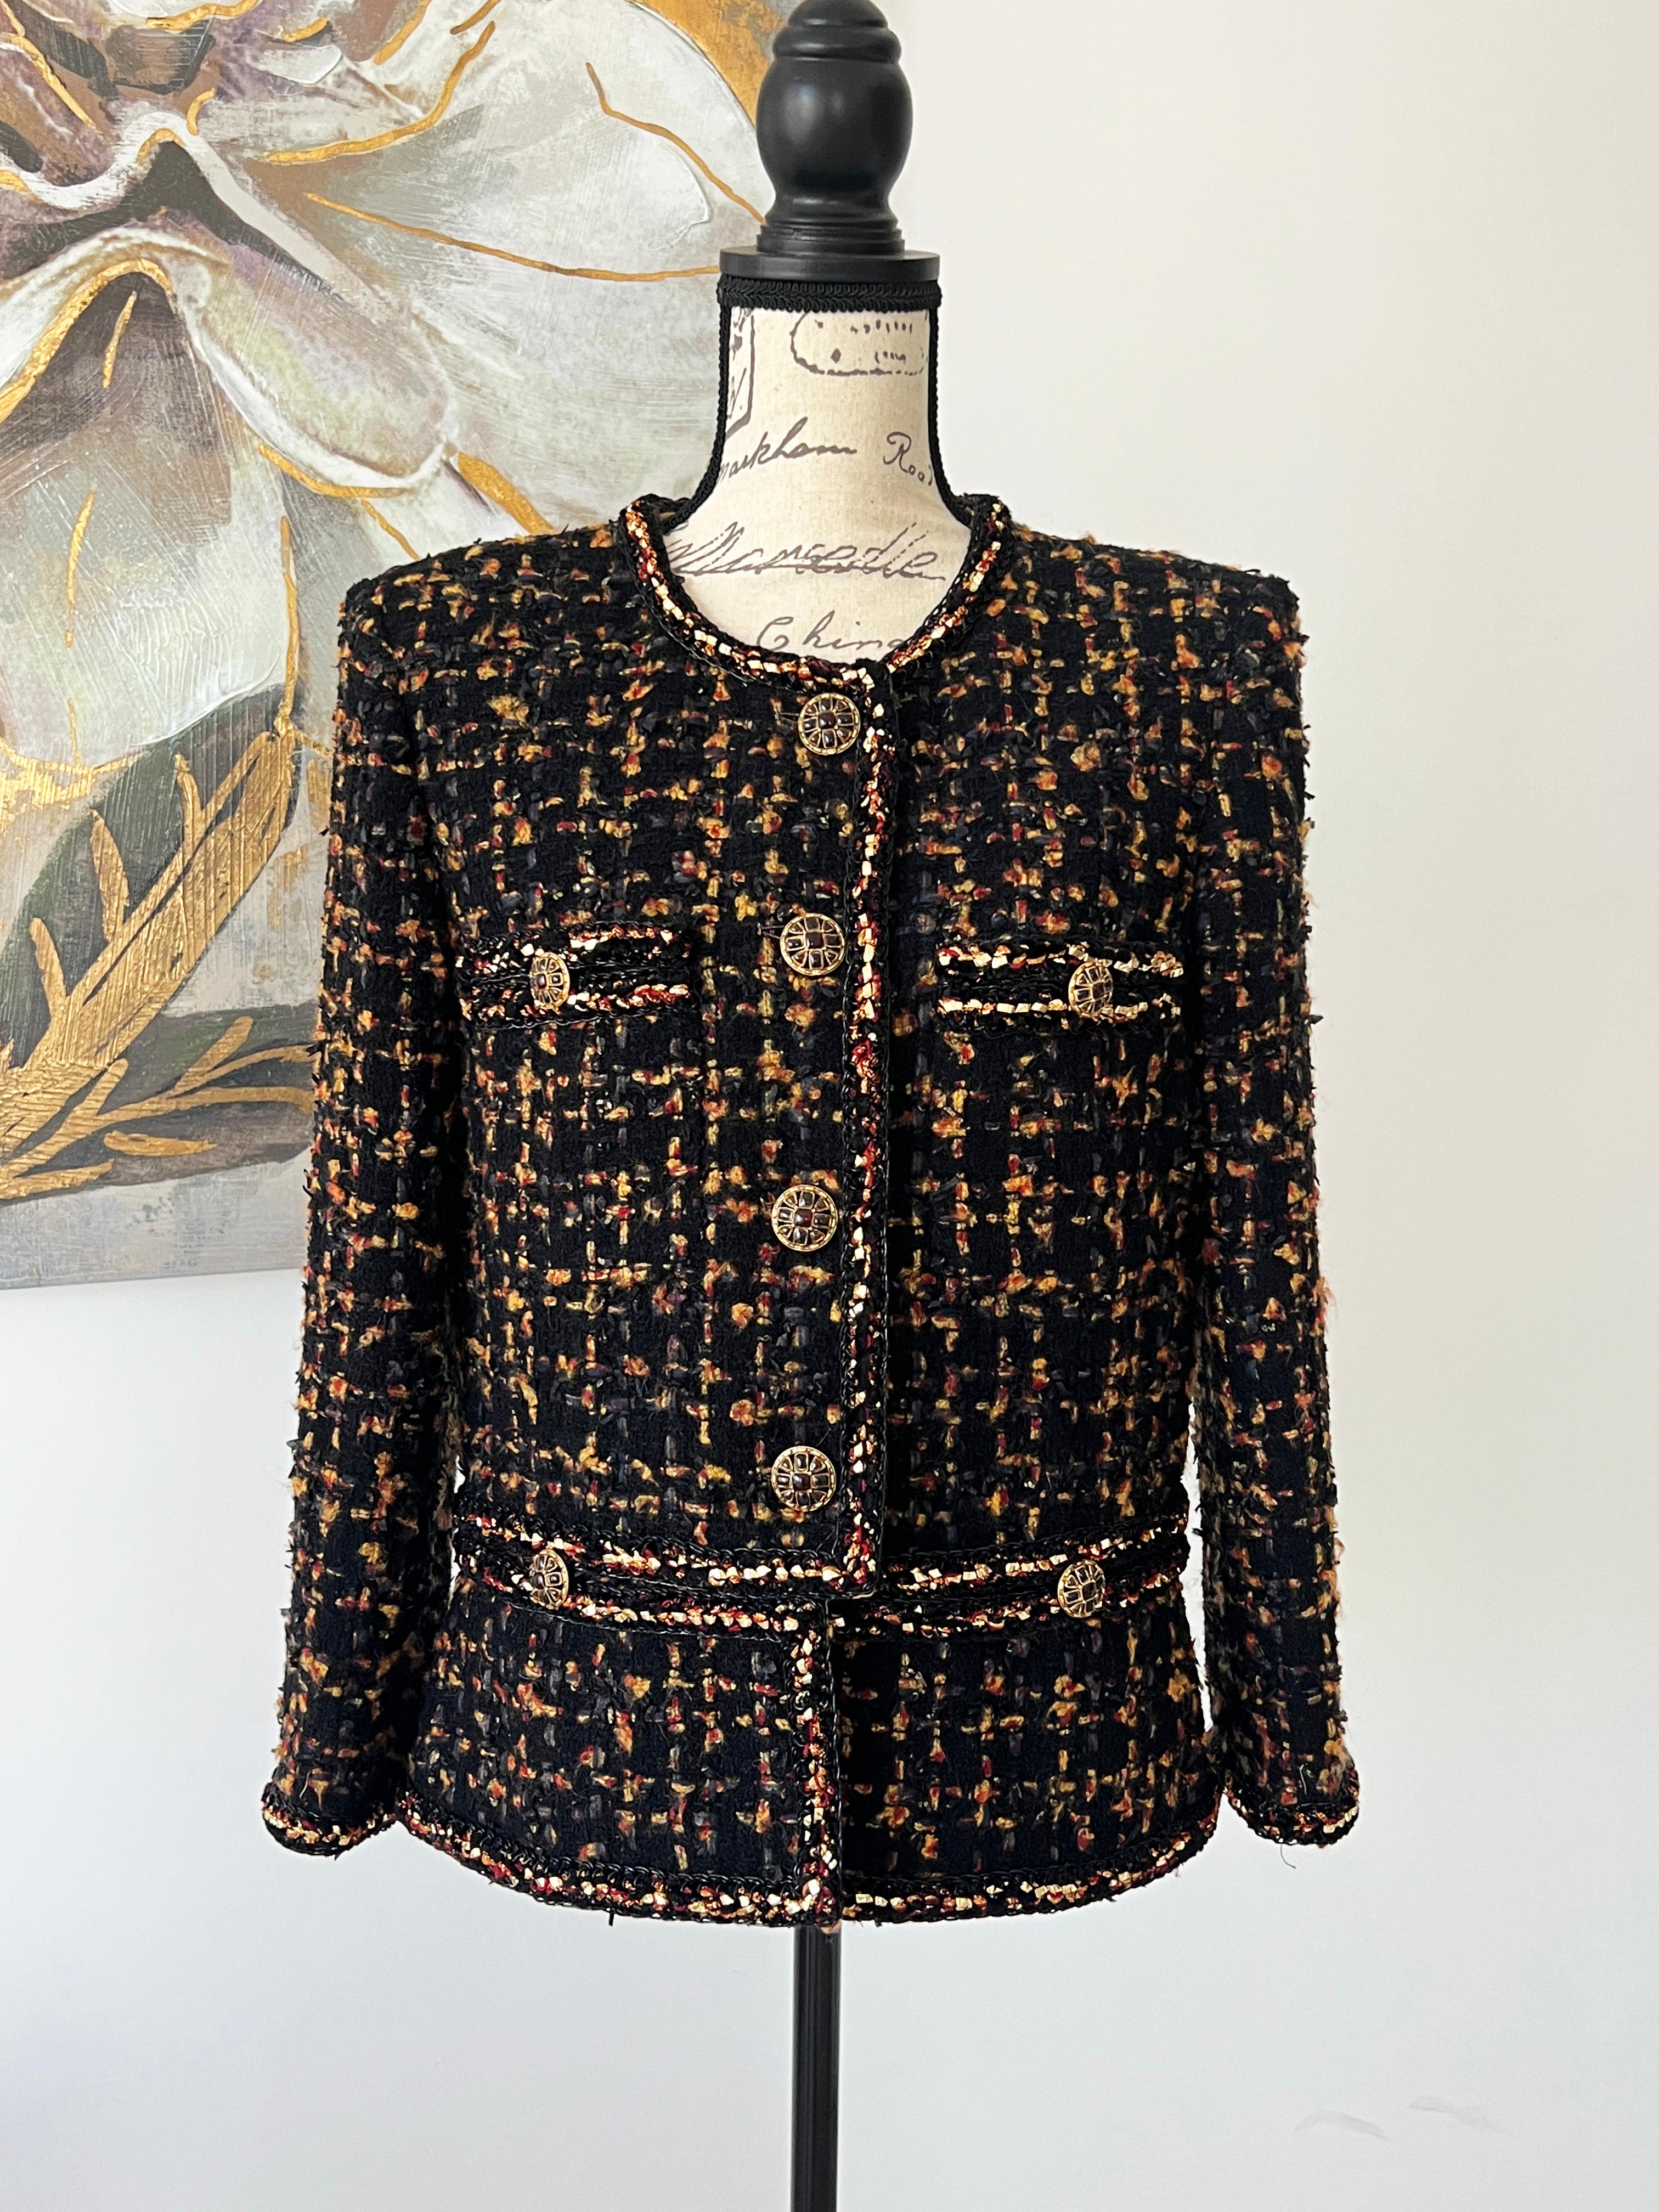 Chanel New-York Collection Black Tweed Jacket, 2019 In New Condition For Sale In Dubai, AE